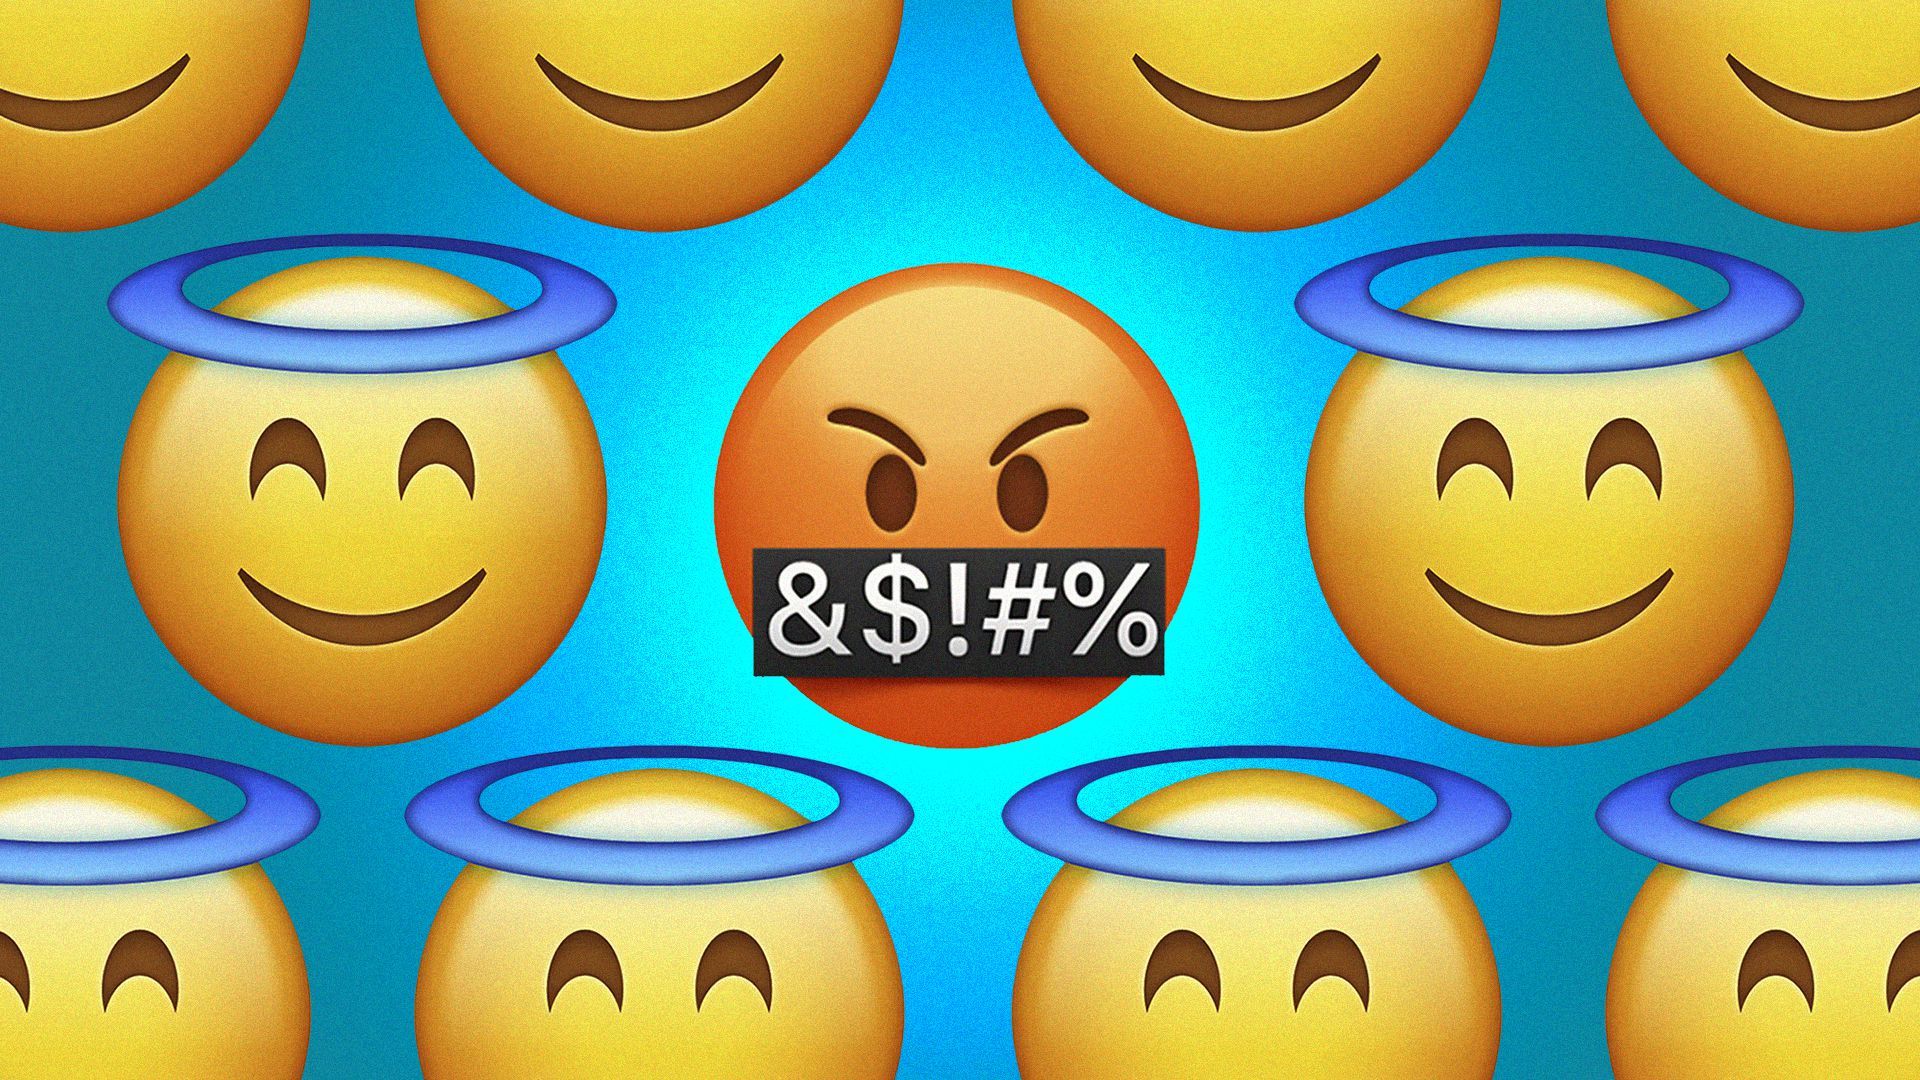 Illustration of an angry, swearing emoji, surrounded by angel emojis.